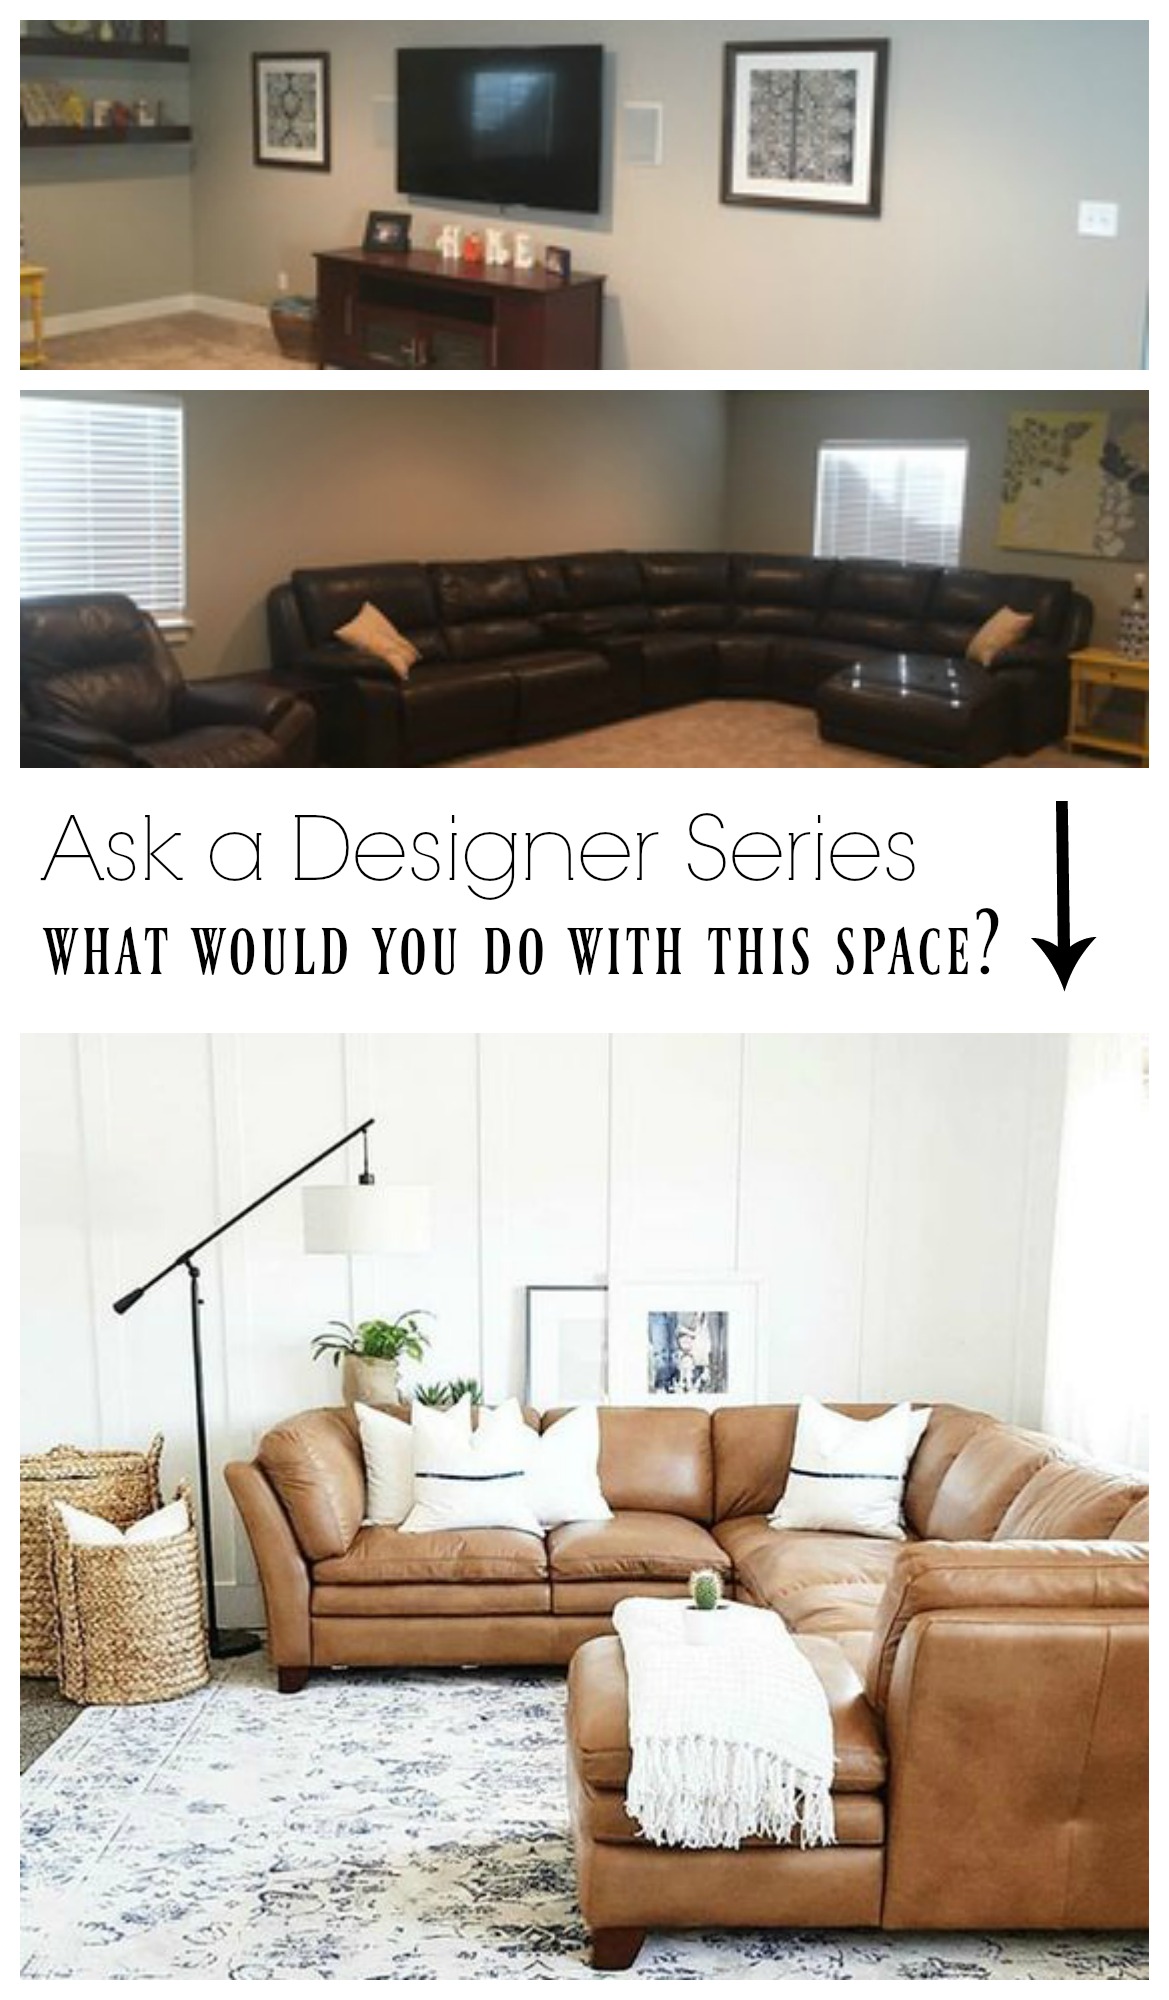 Ask a Designer Series- What would you do wtih this space? 1